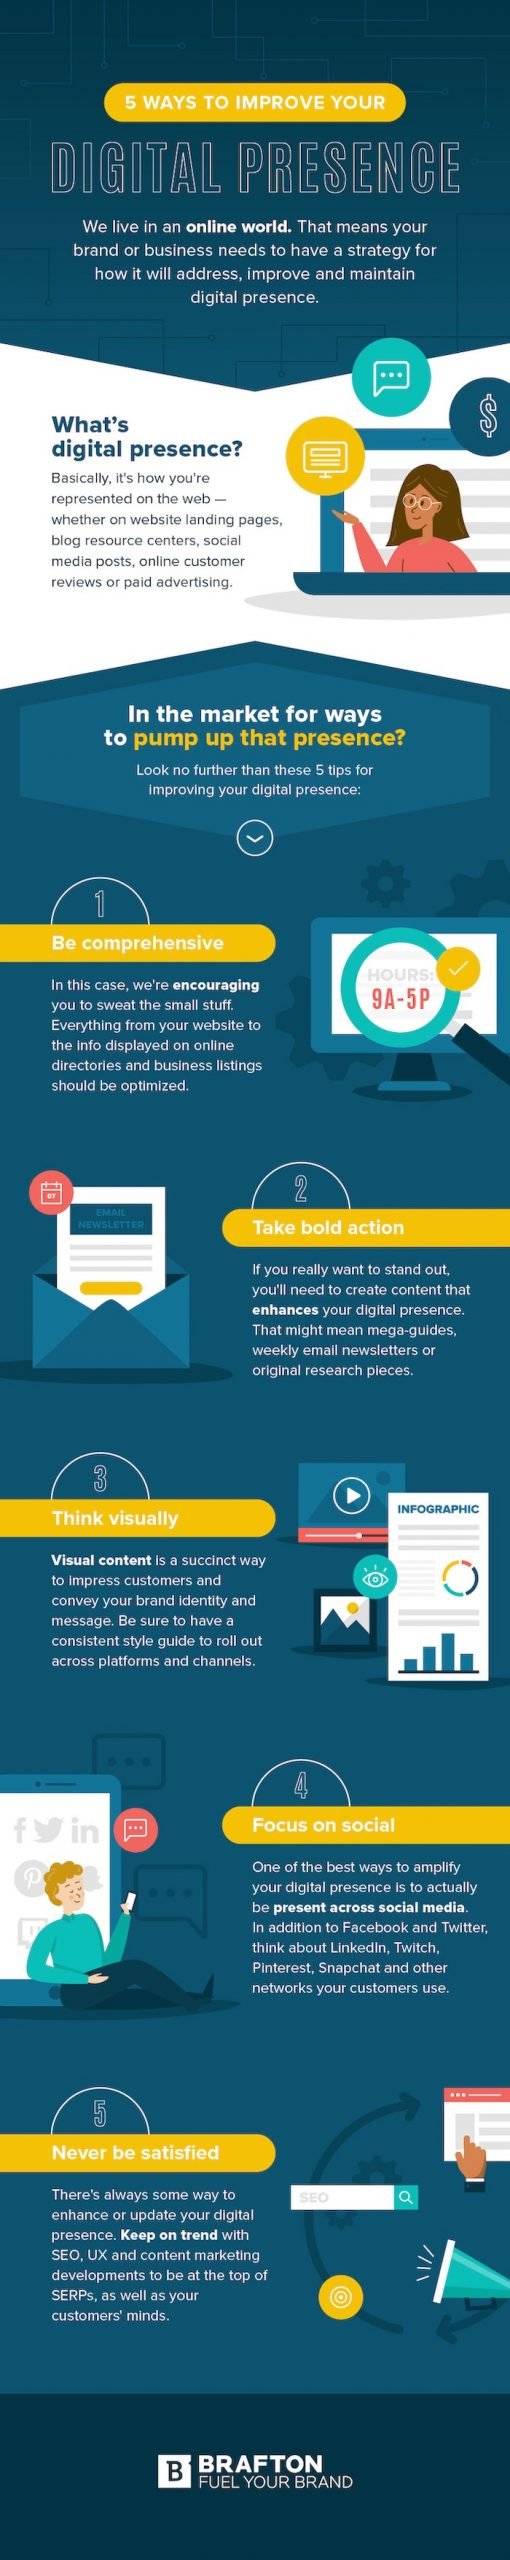 Five Tips for Improving Your Digital Presence in 2021 [Infographic]